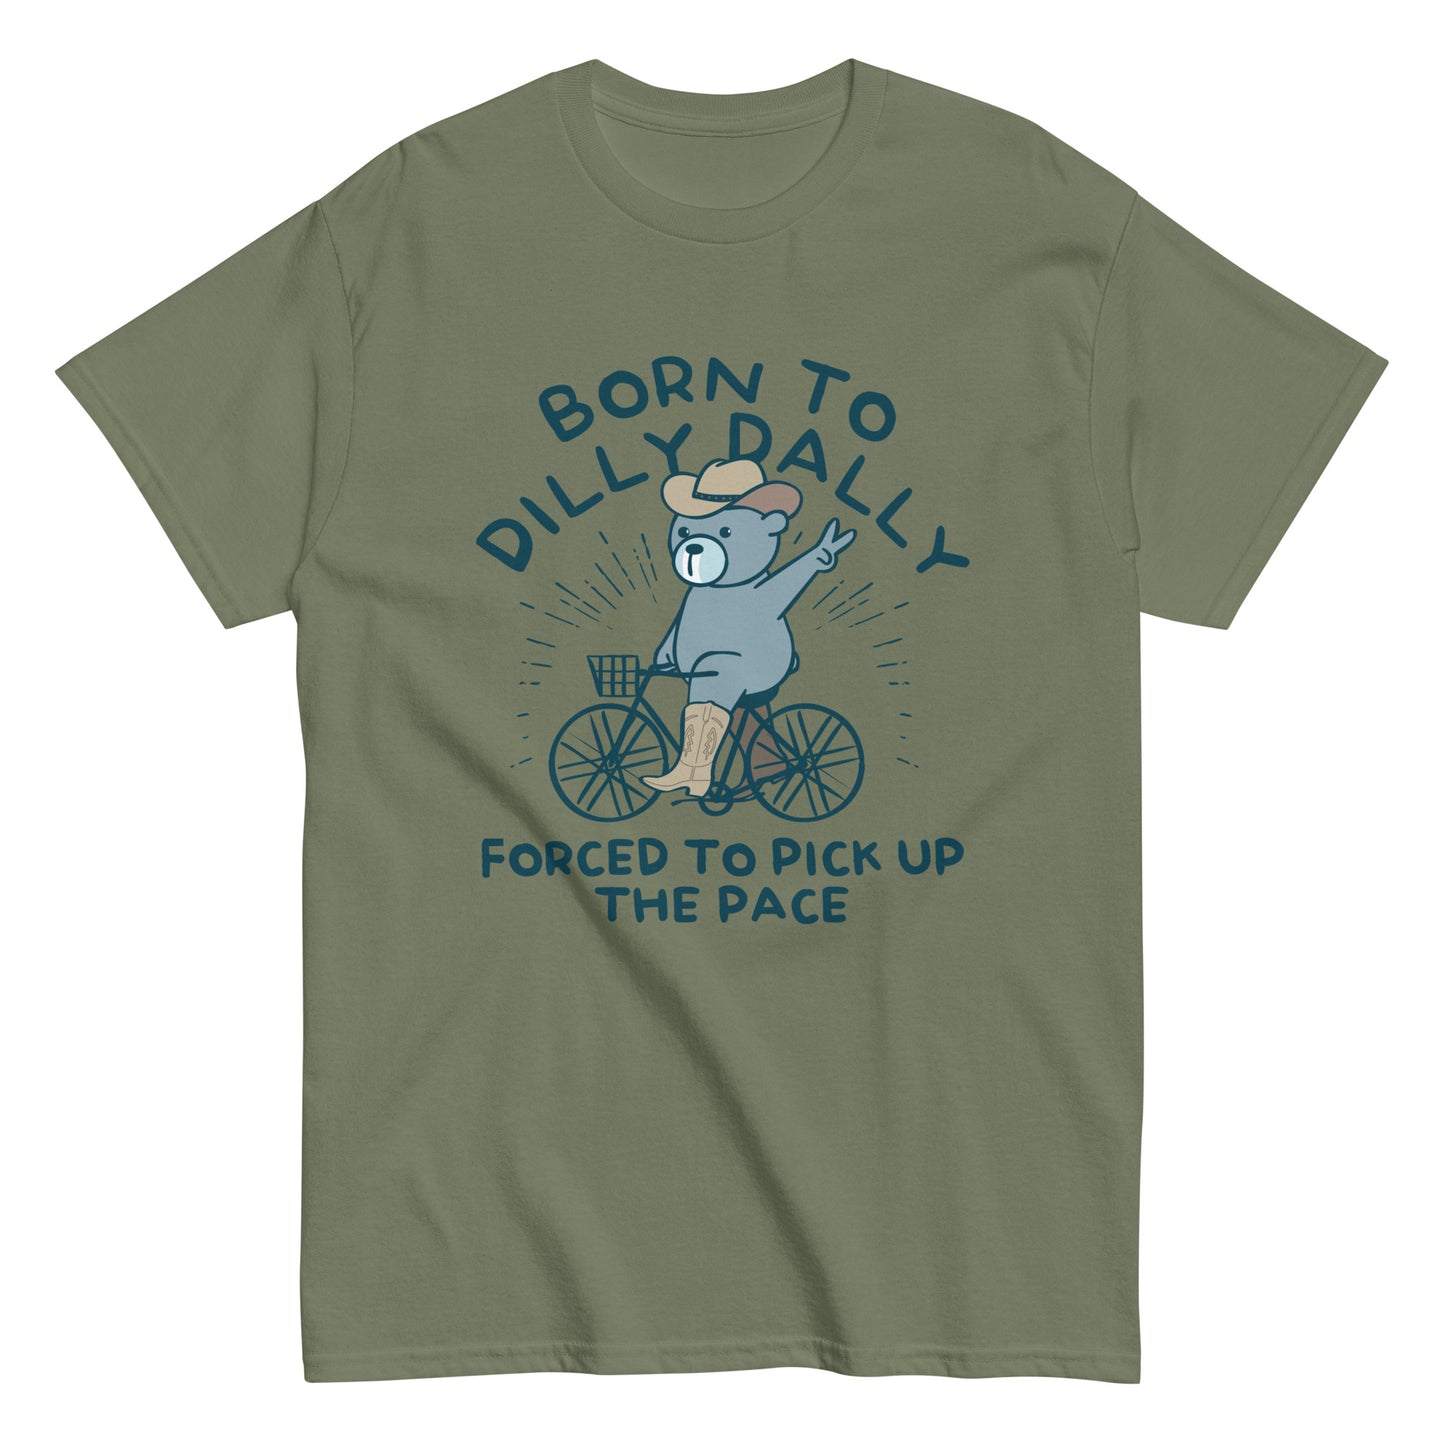 Born To Dilly Dally Forced To Pick Up The Pace Men's Classic Tee